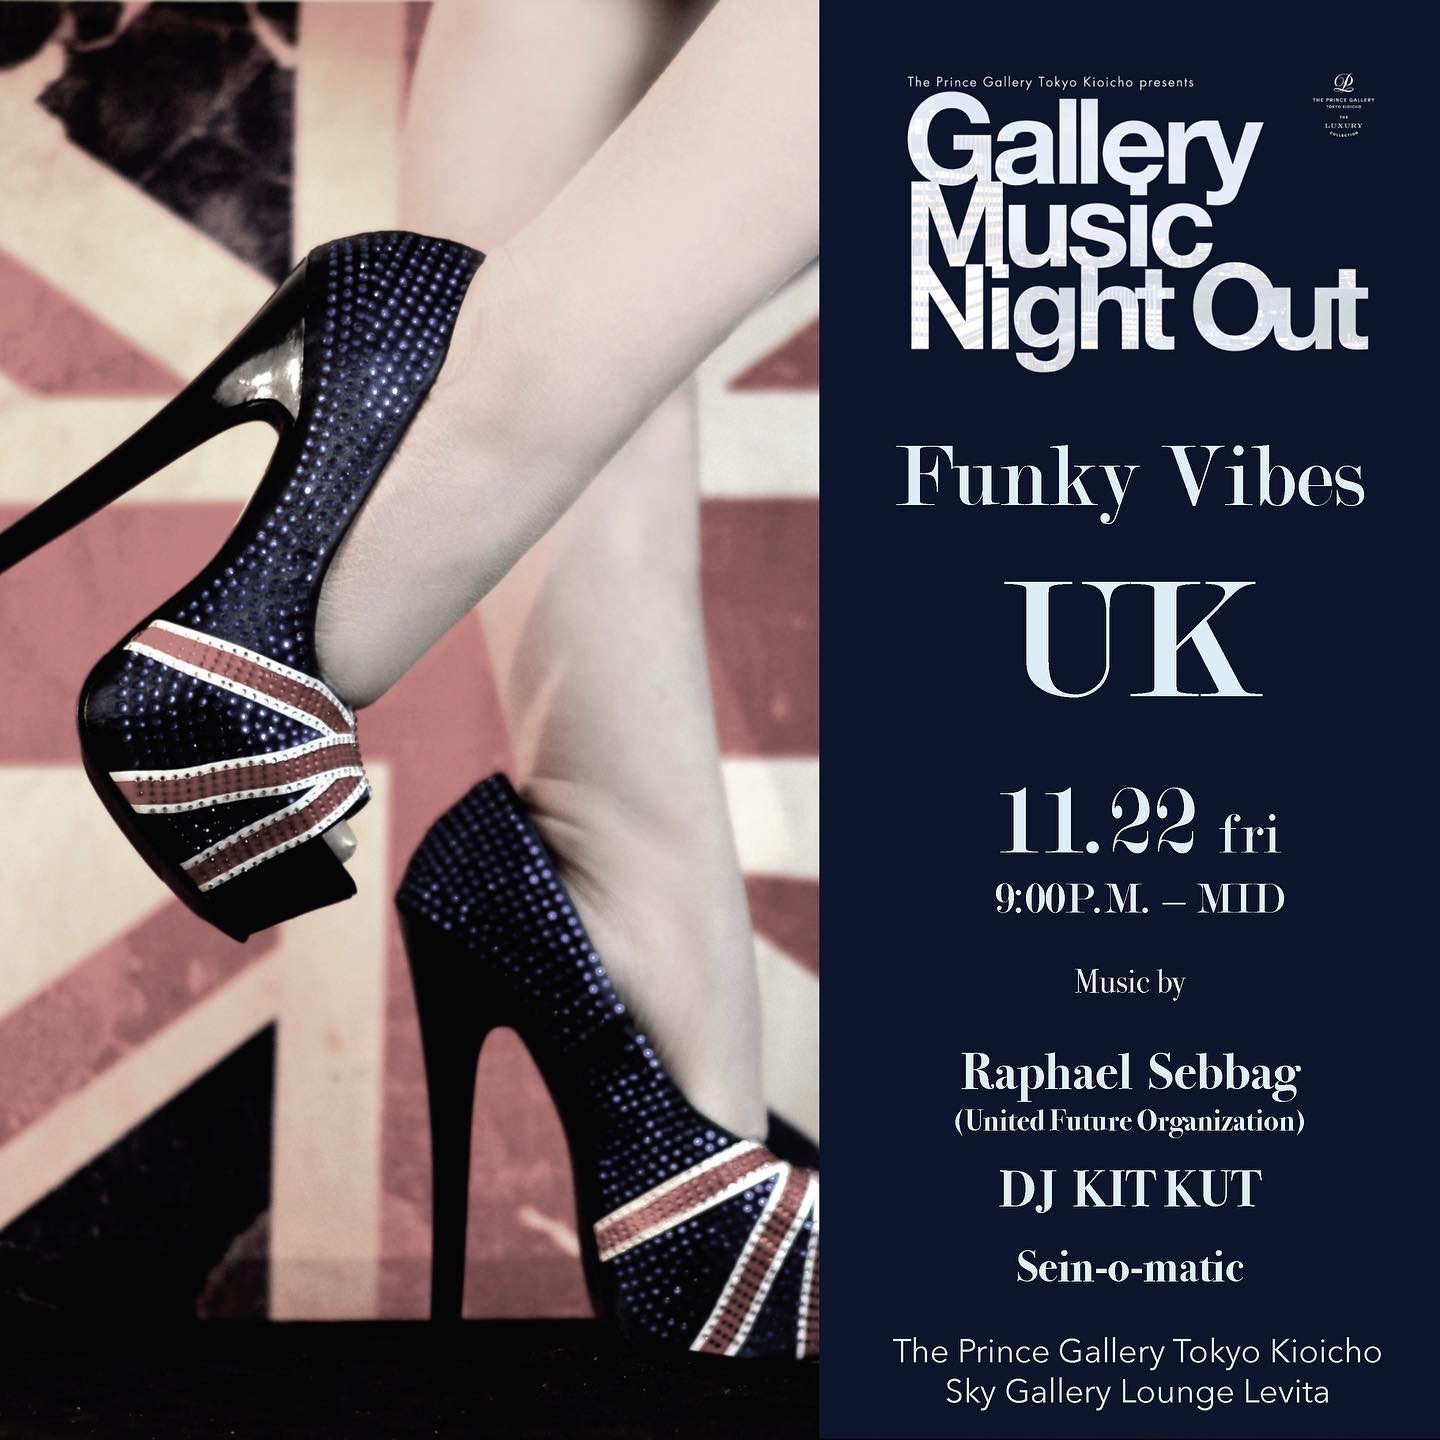 2019/11/22 (fri) Gallery Music Night Out @ The Prince Gallery